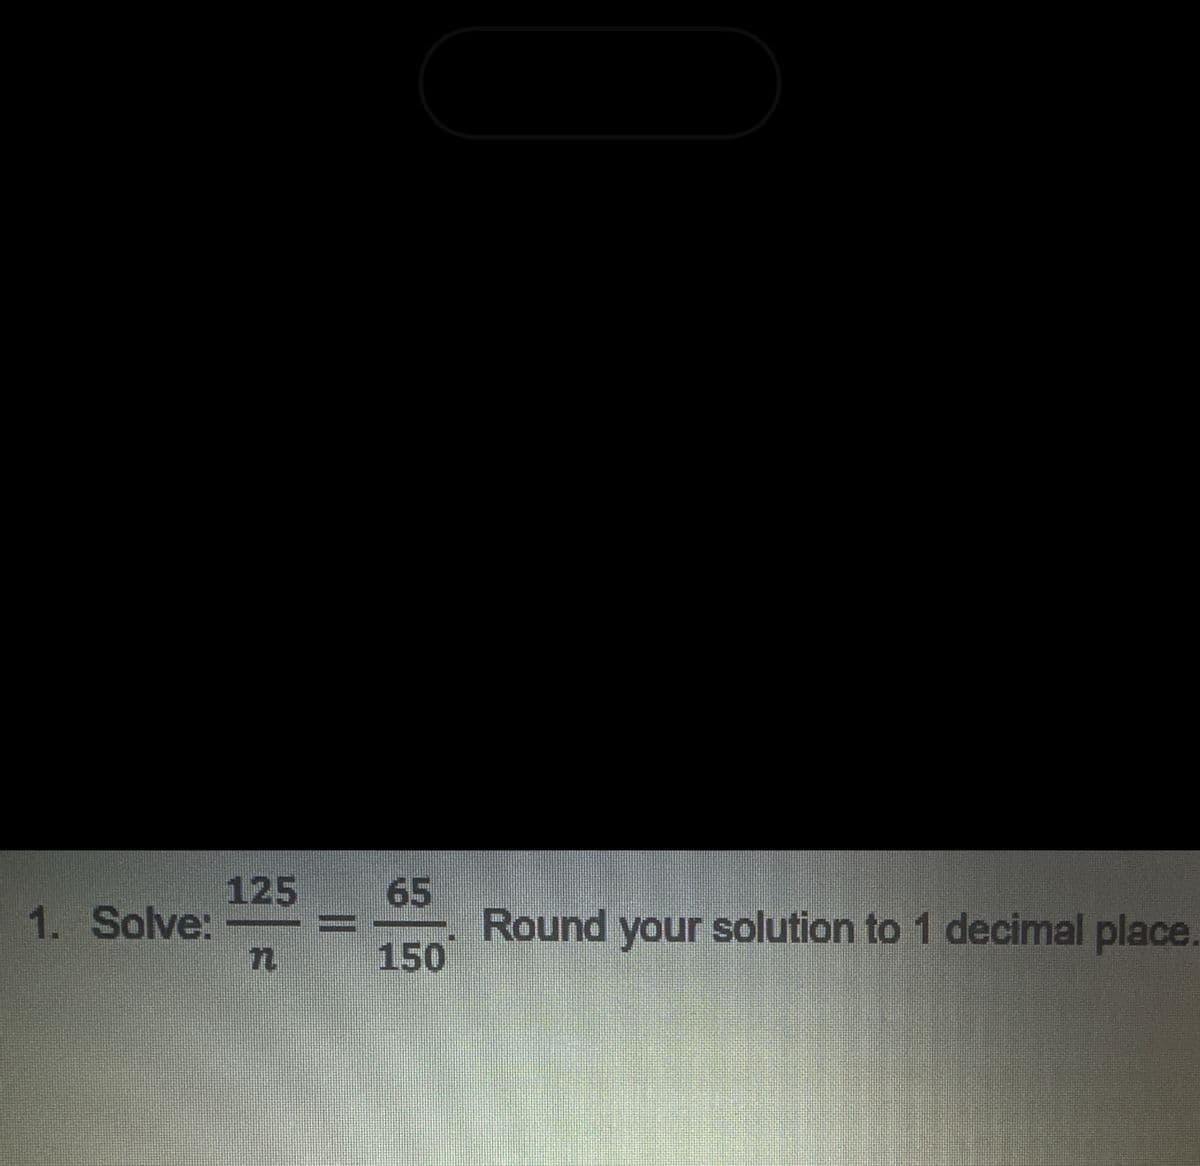 1. Solve:
125
65
150
Round your solution to 1 decimal place.